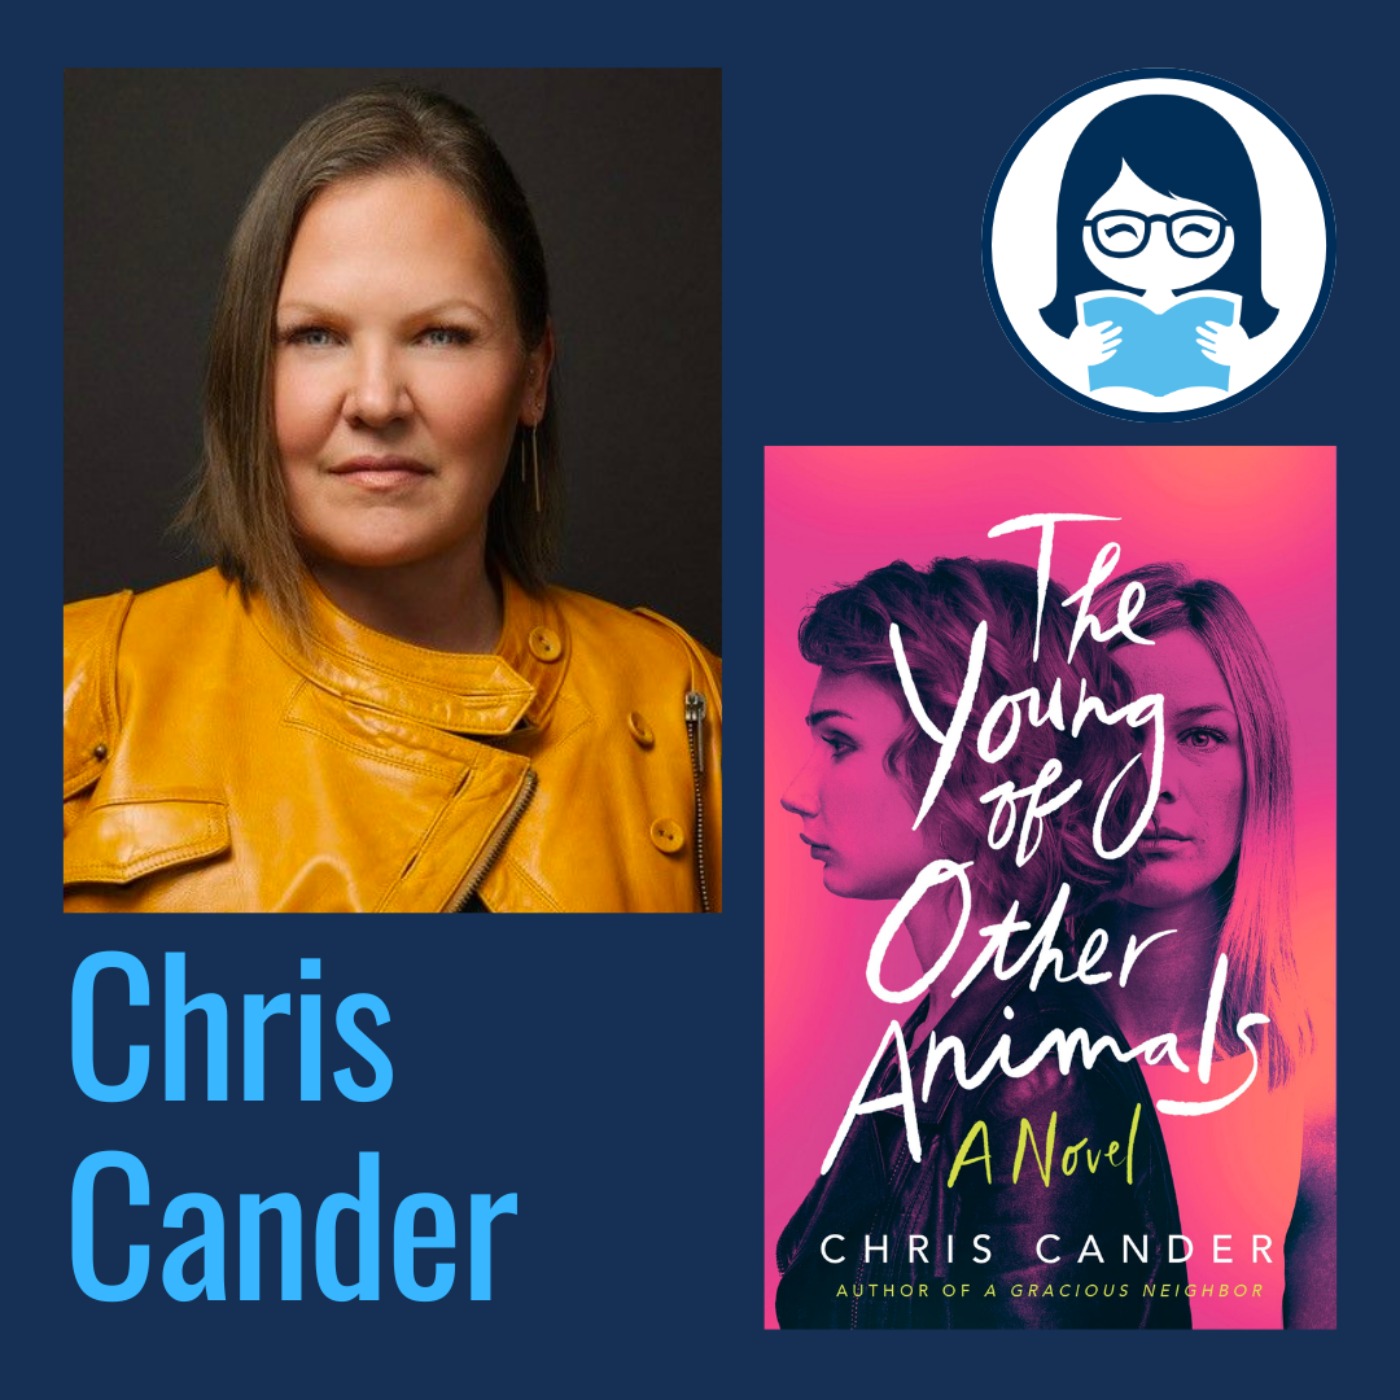 Chris Cander, THE YOUNG OF OTHER ANIMALS